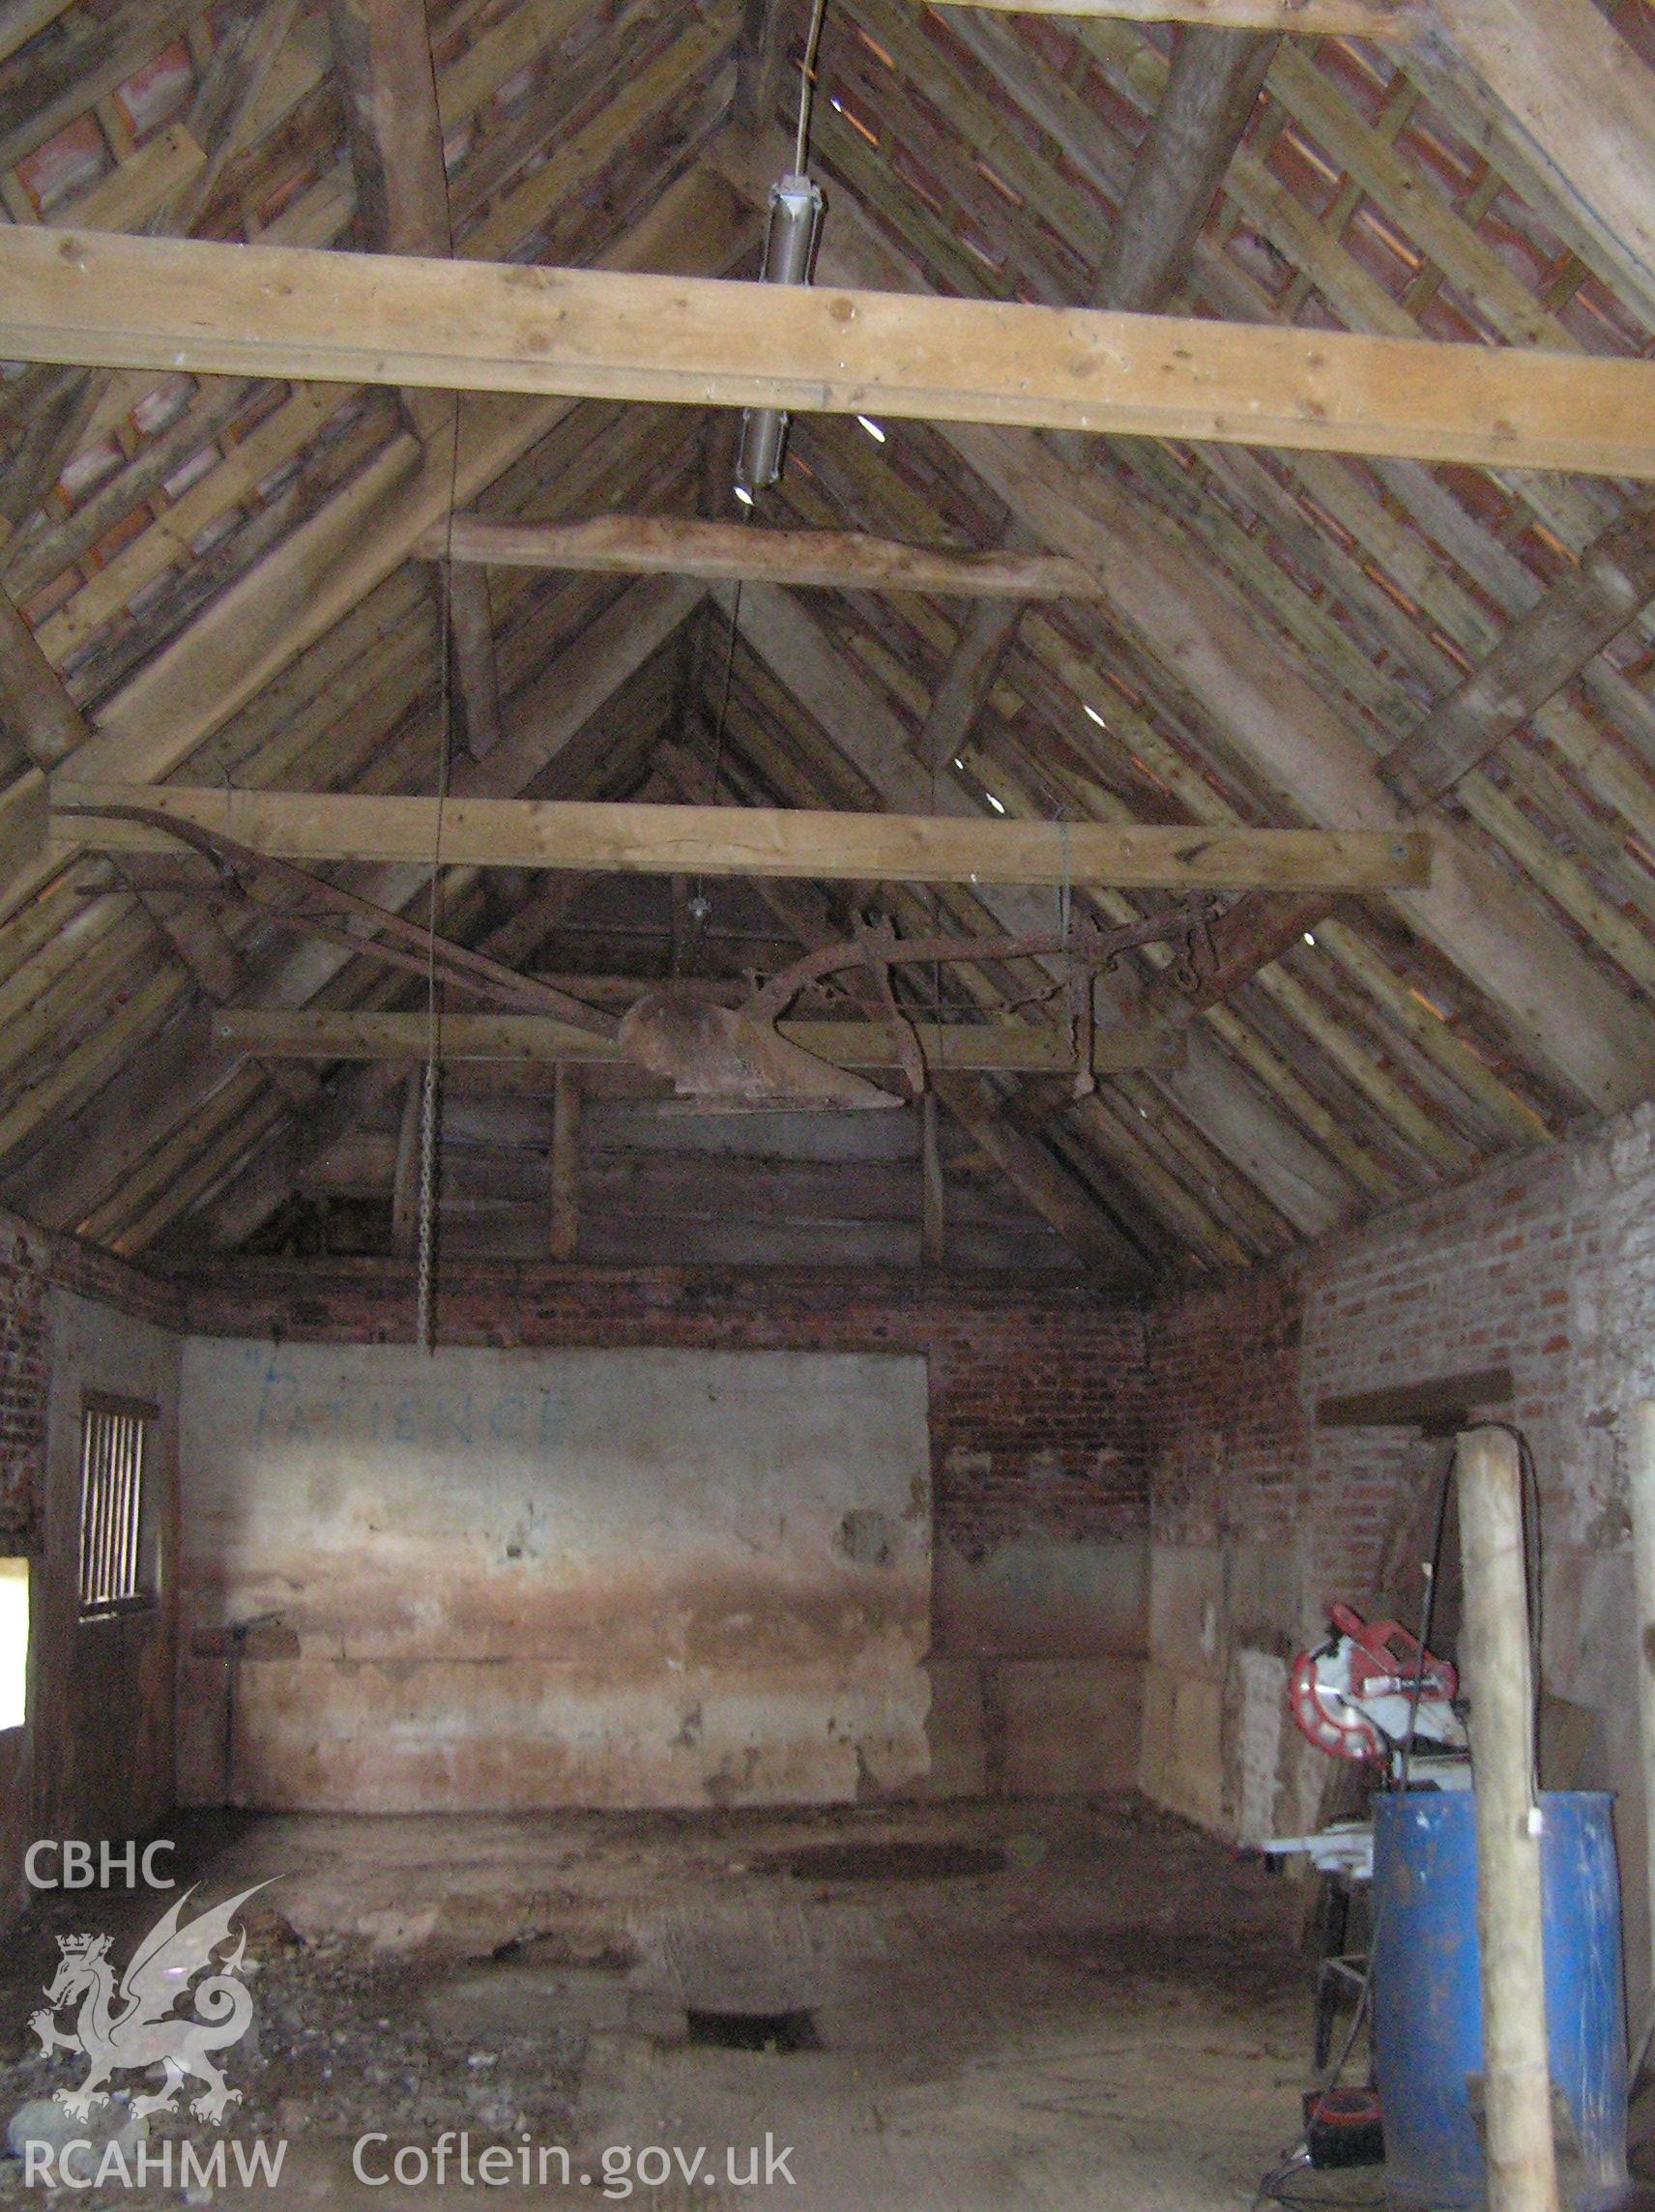 Colour photo showing interior view of the cowhouse looking north, taken by John Wheelock and donated as a condition of planning consent.